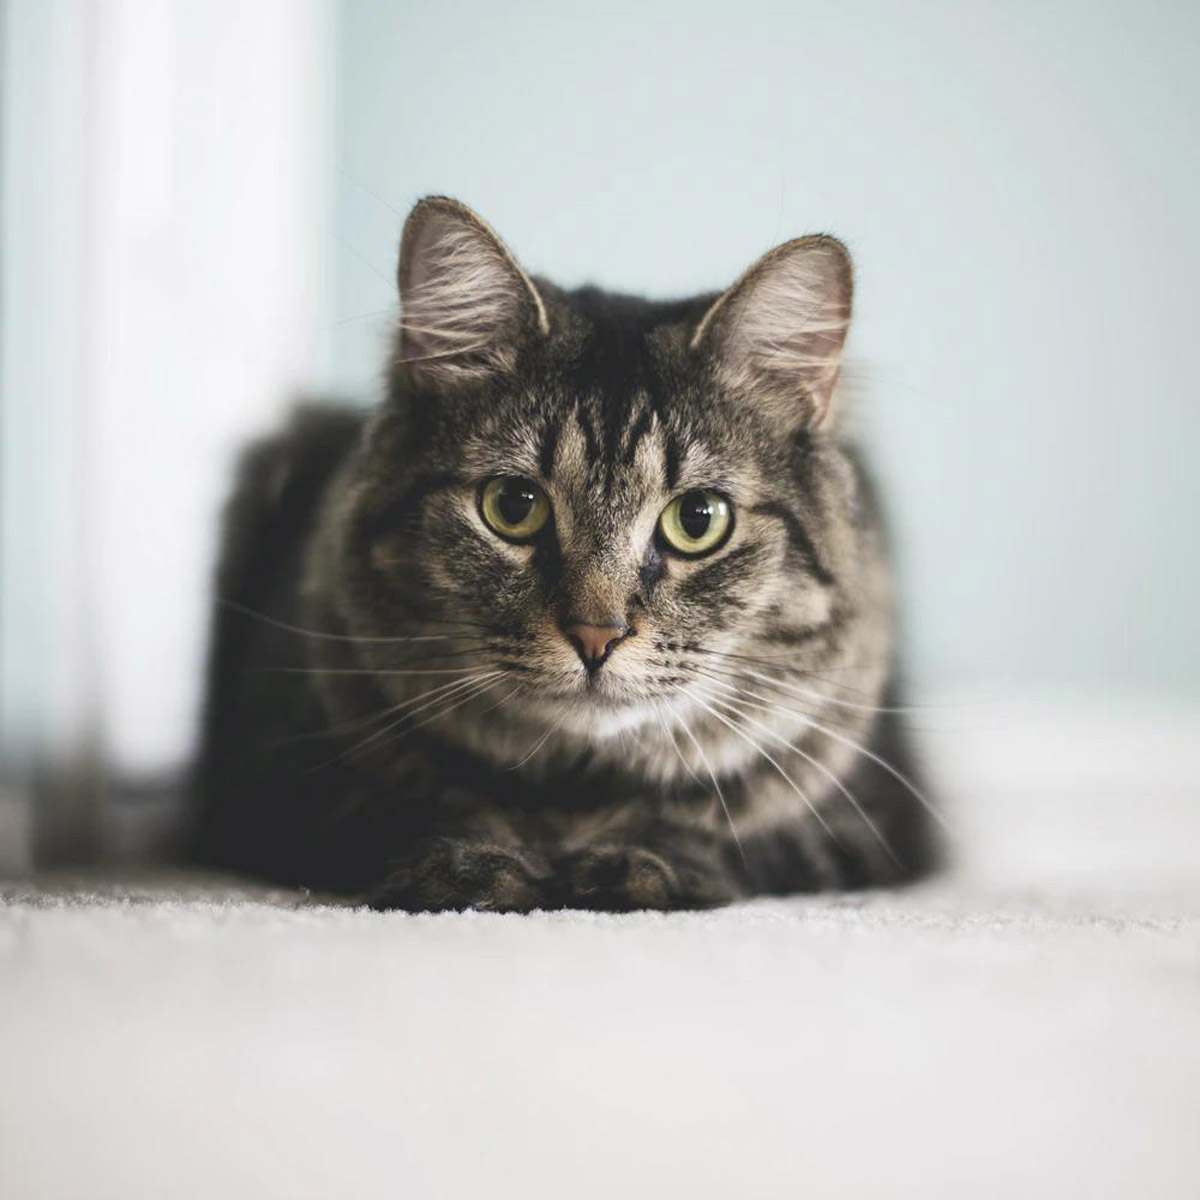 Common Health Issues in Cats According to Life Stages